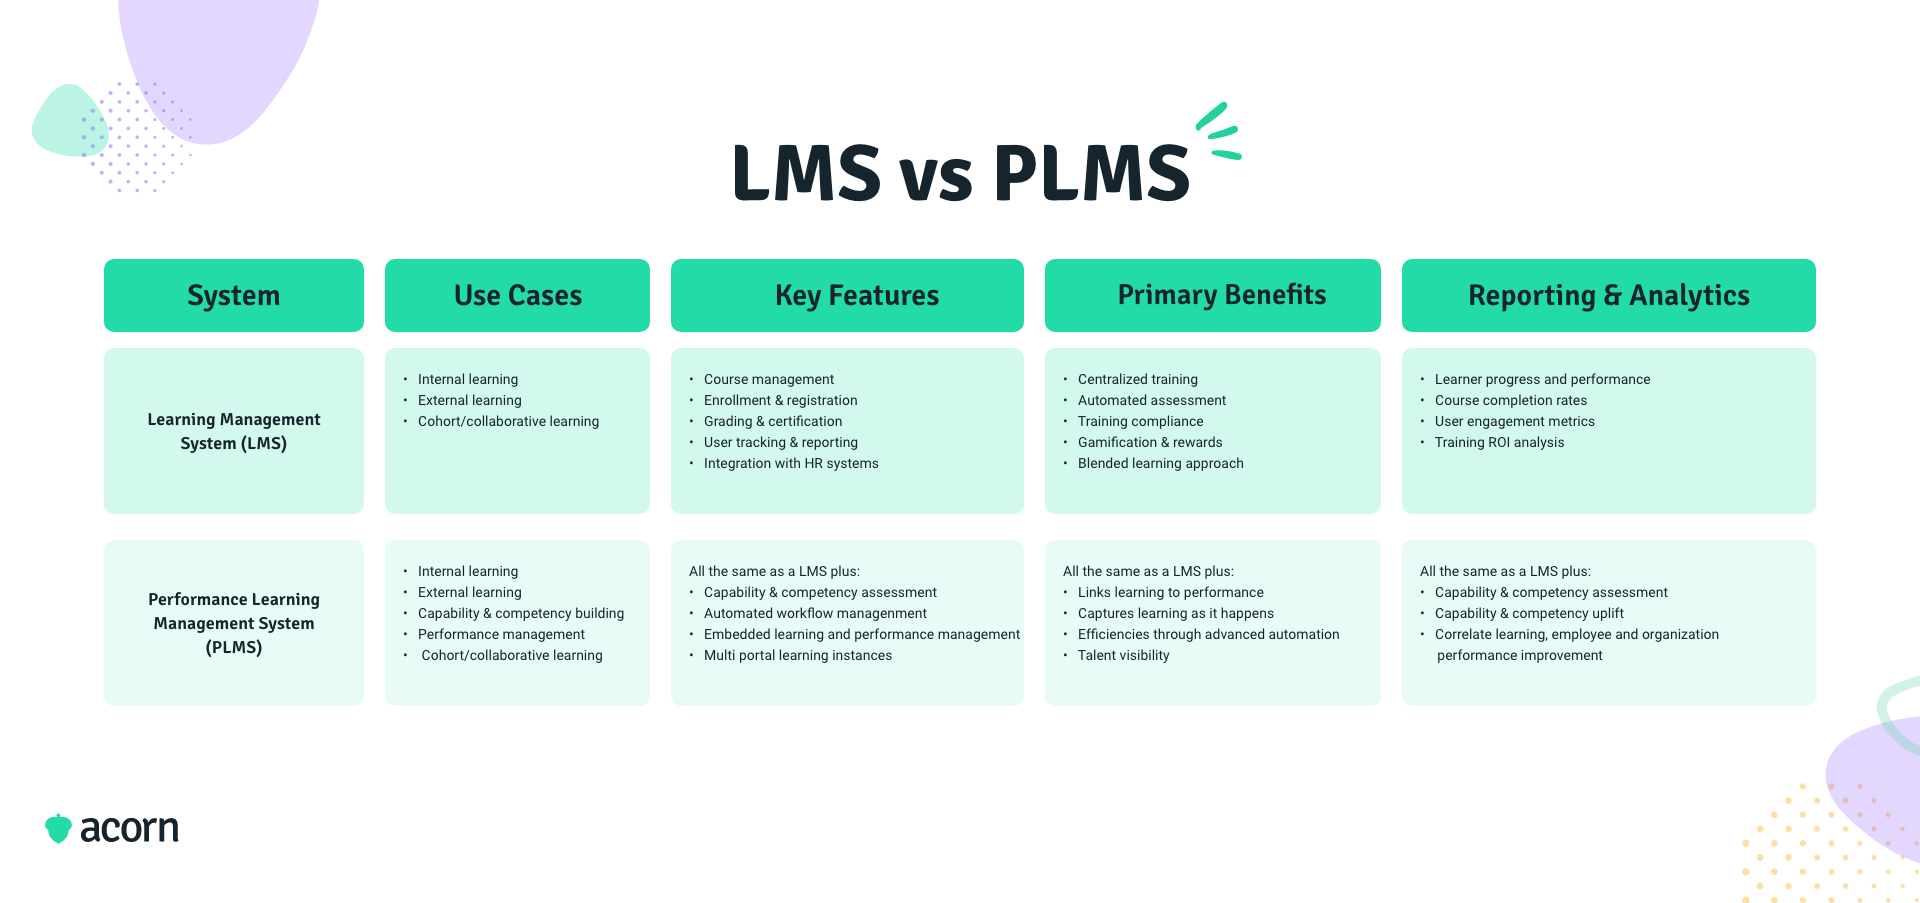 Infographic showing the key differences in system, use cases, key features, primary benefits, and reporting & analytics between an LMS and PLMS